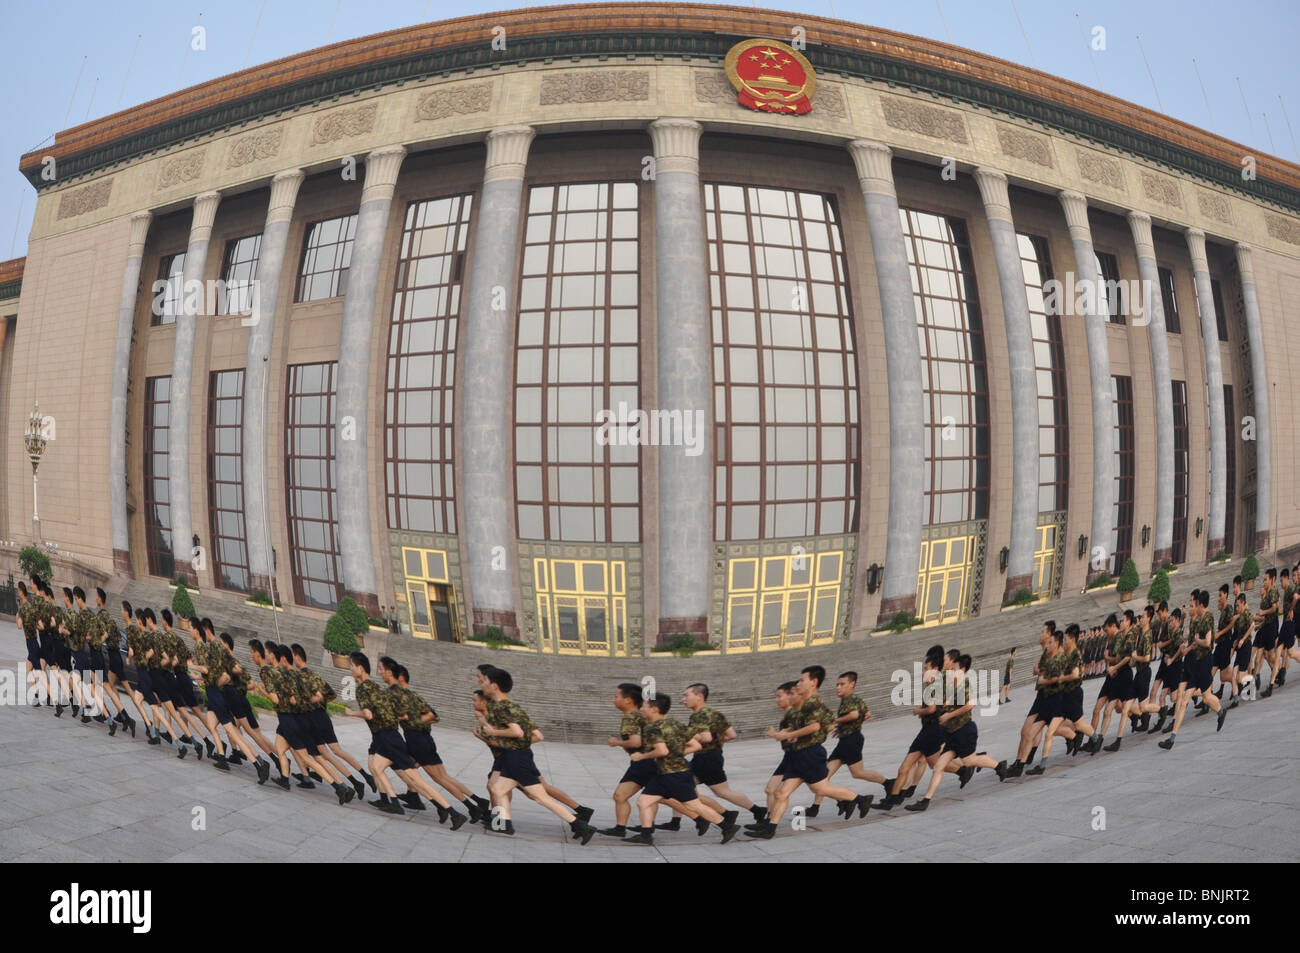 Chinese soldiers do early morning physical PT exercises in Tiananmen Square, Beijing, China Stock Photo